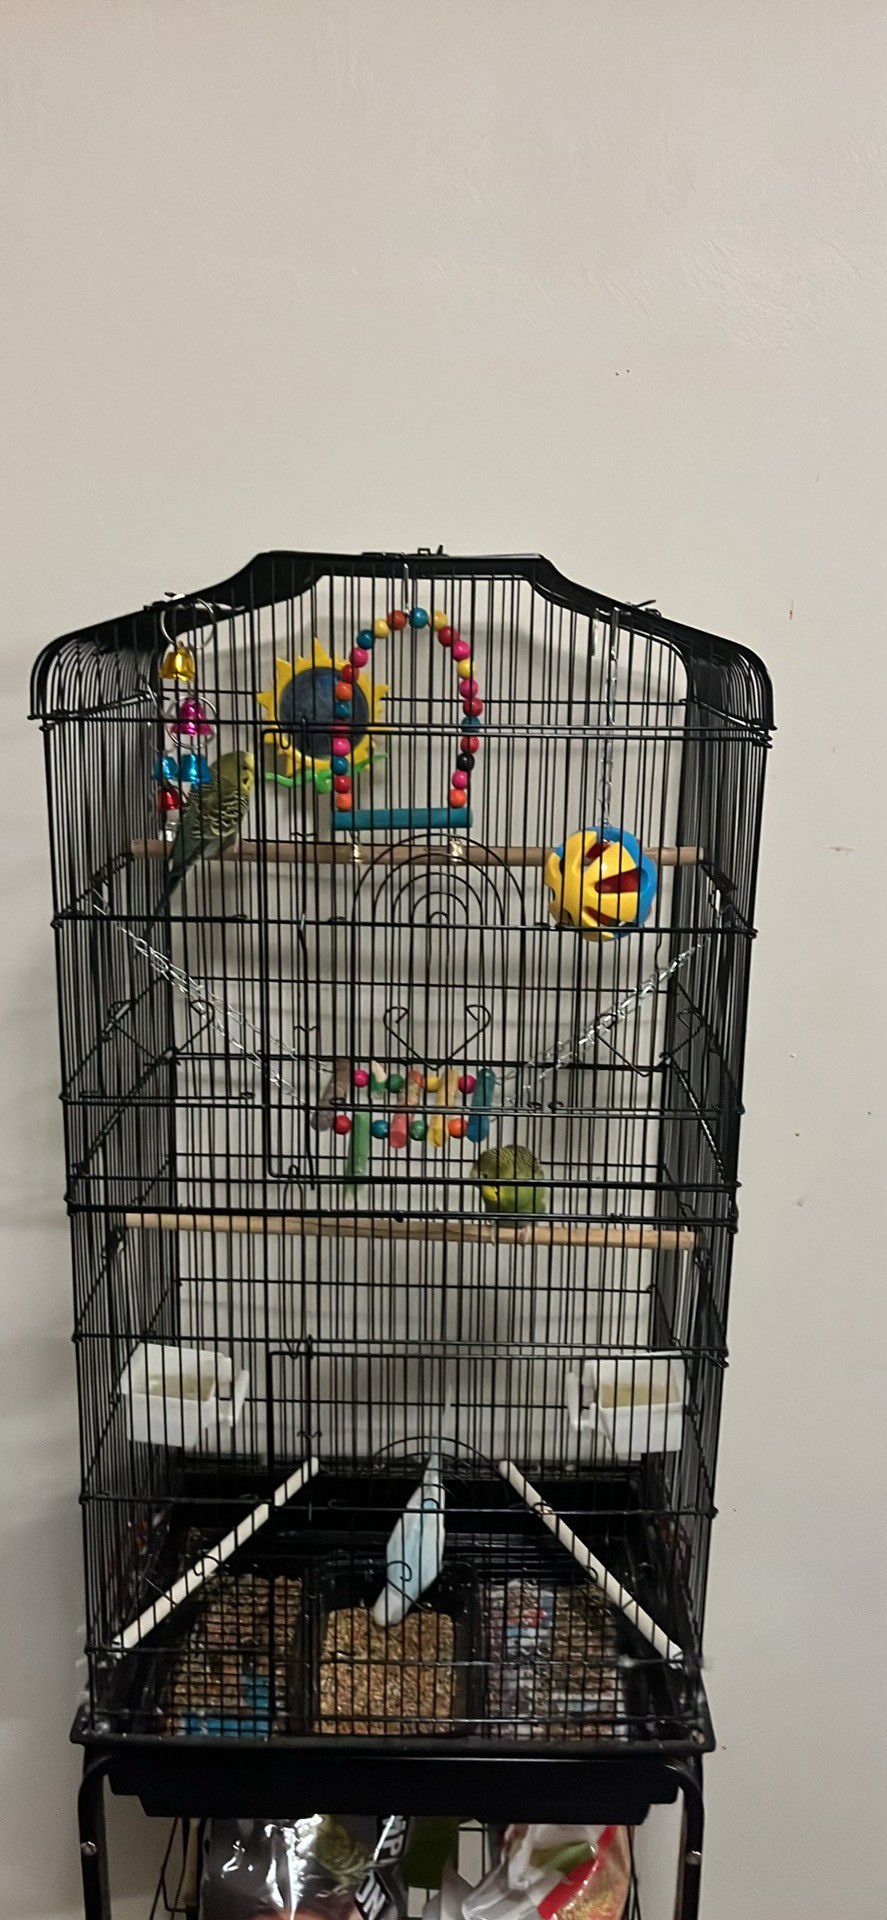 Birds With Cage 